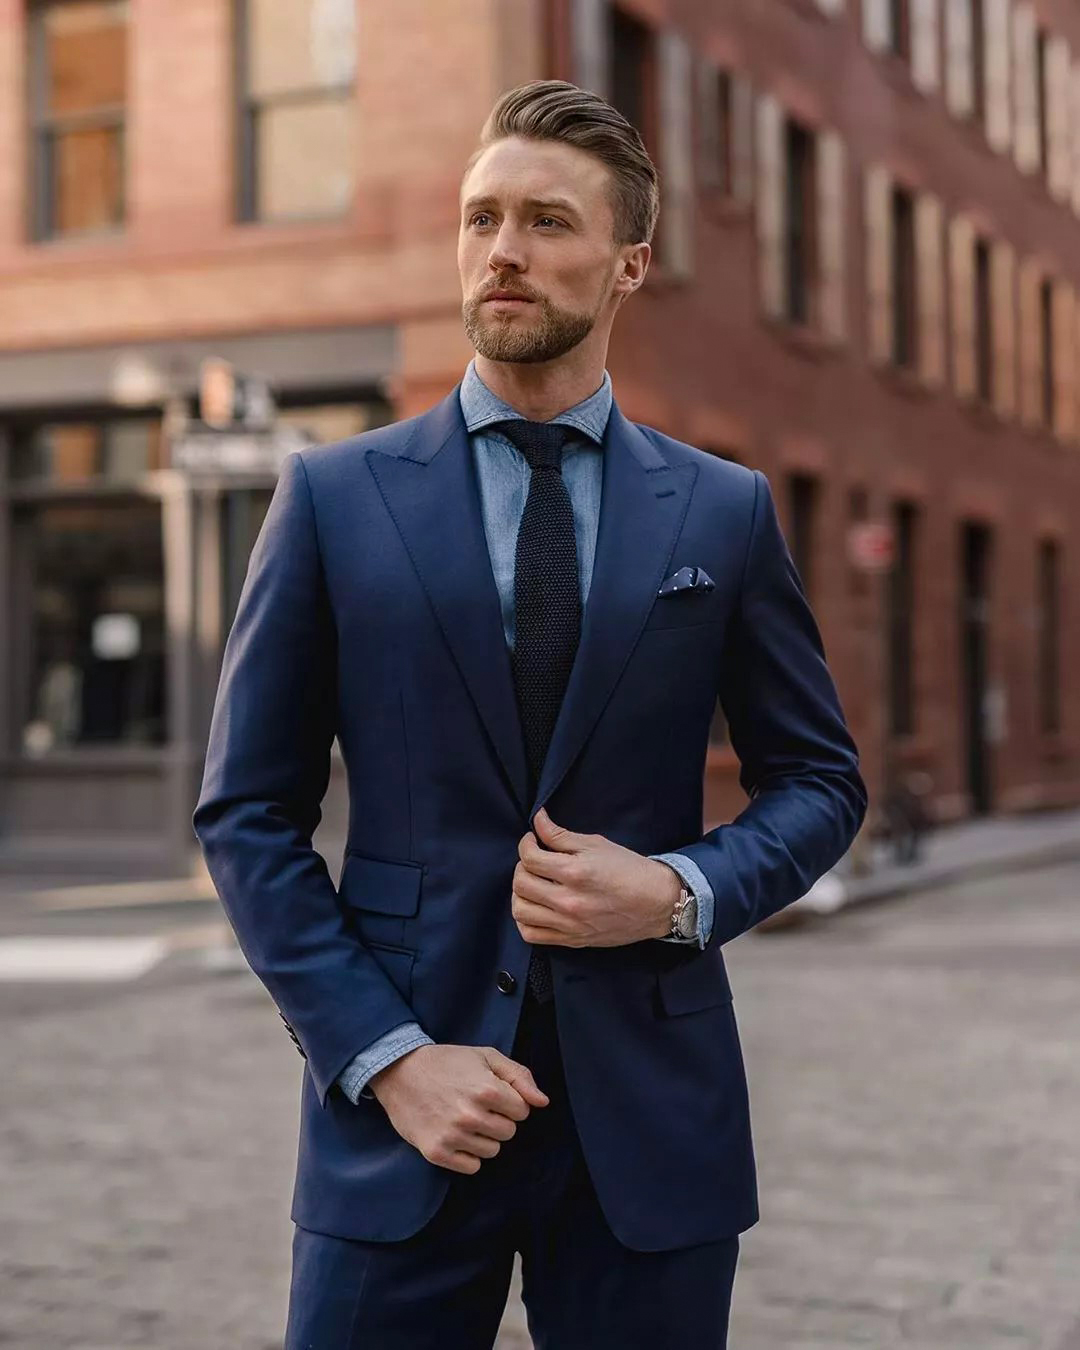 Blue Suits For Men: Types, Brands, How To Wear Man Of Many | vlr.eng.br